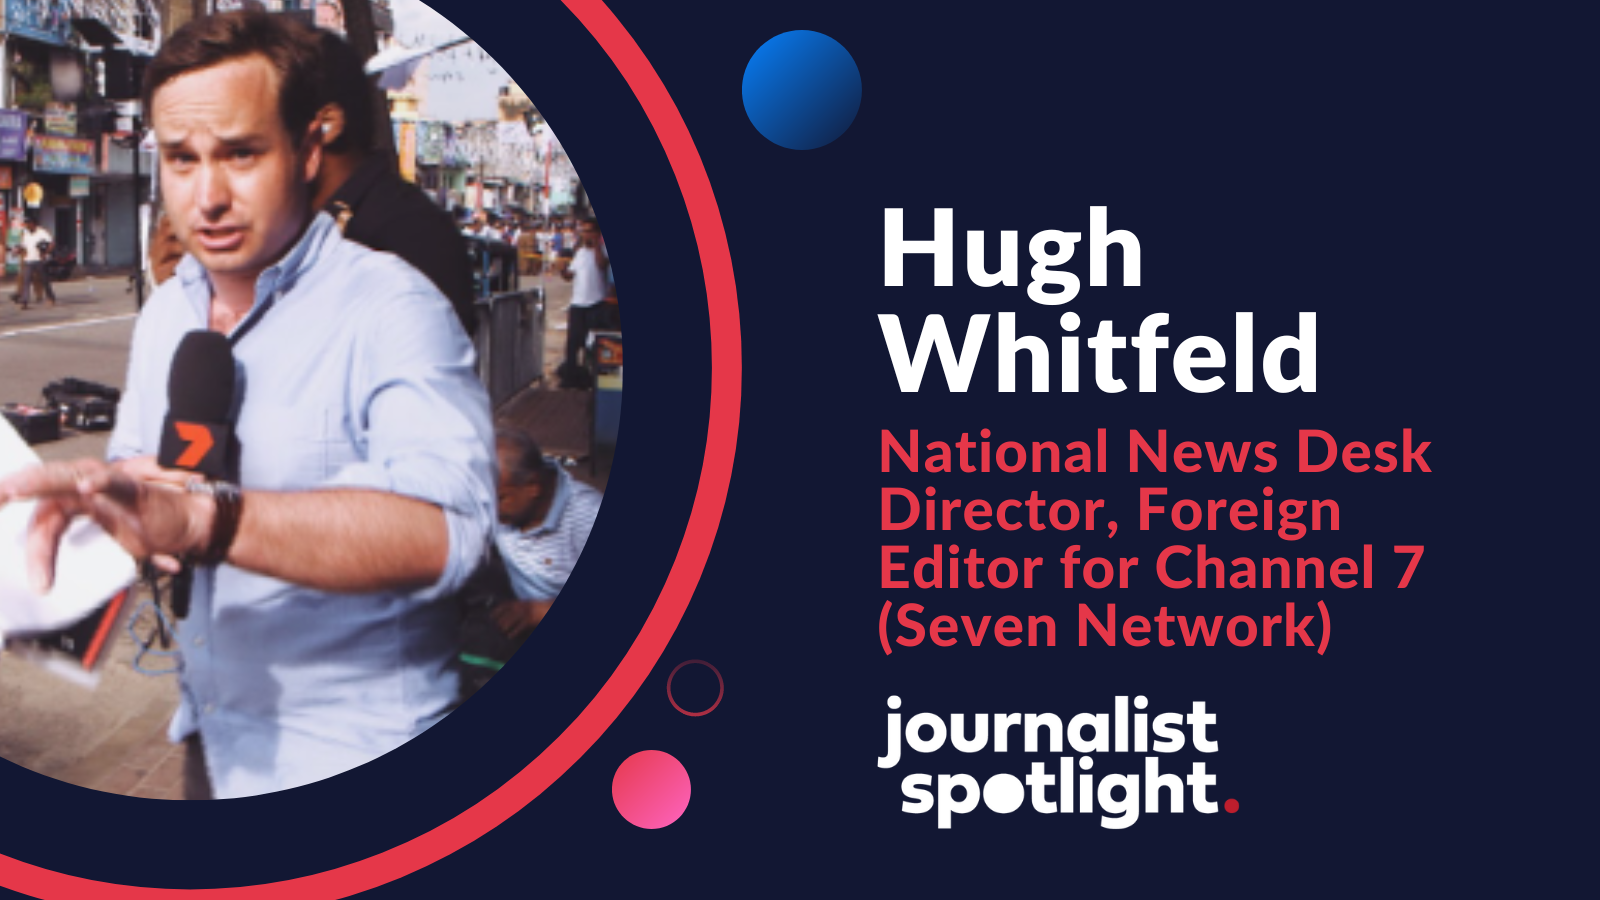 Journalist Spotlight | Interview with Hugh Whitfeld, National News Desk Director, Foreign Editor for Channel 7 (Seven Network)